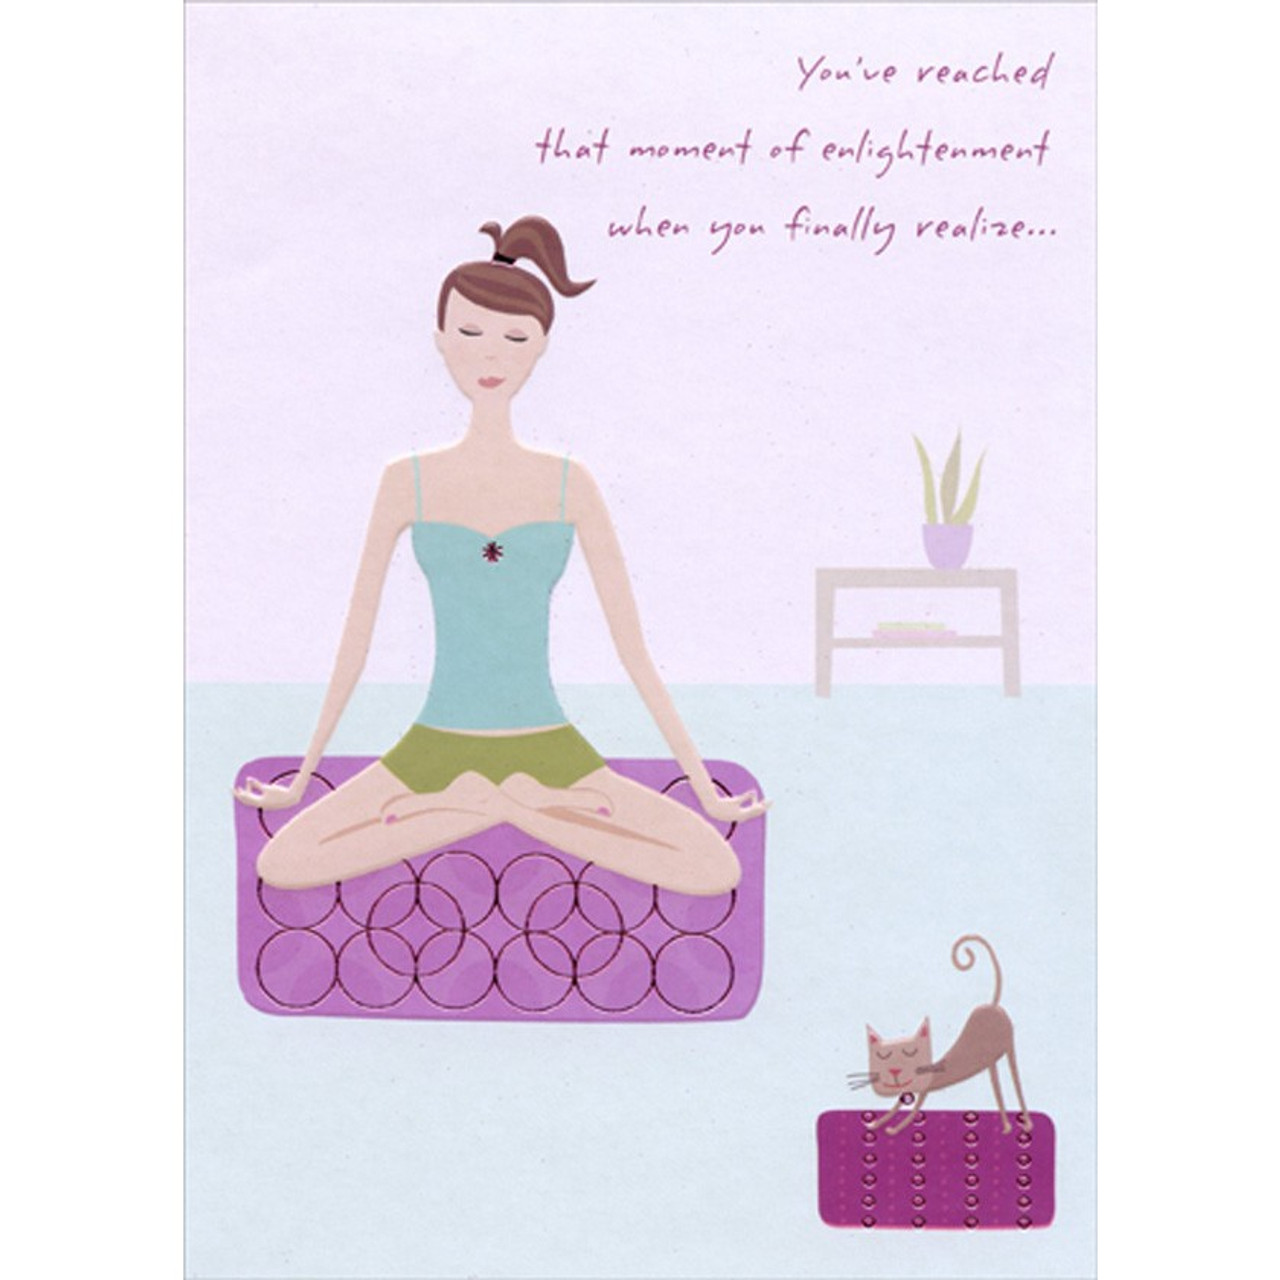 Yoga Gift Let Your Practice Be A Celebration Of Life Funny Women's